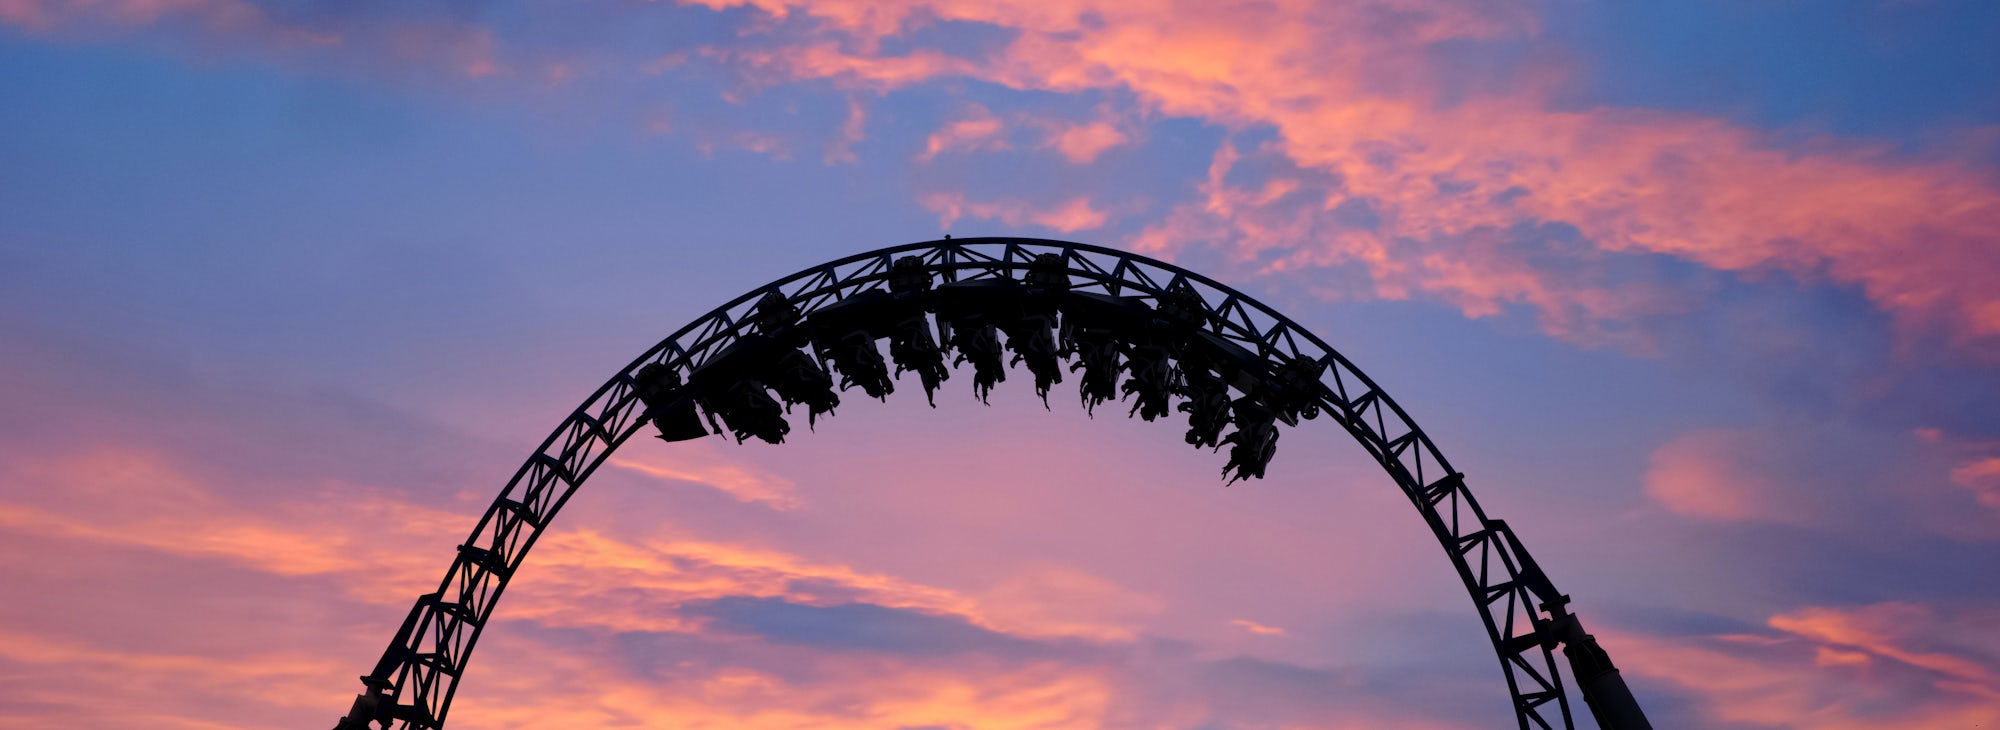 Rollercoaster at dusk